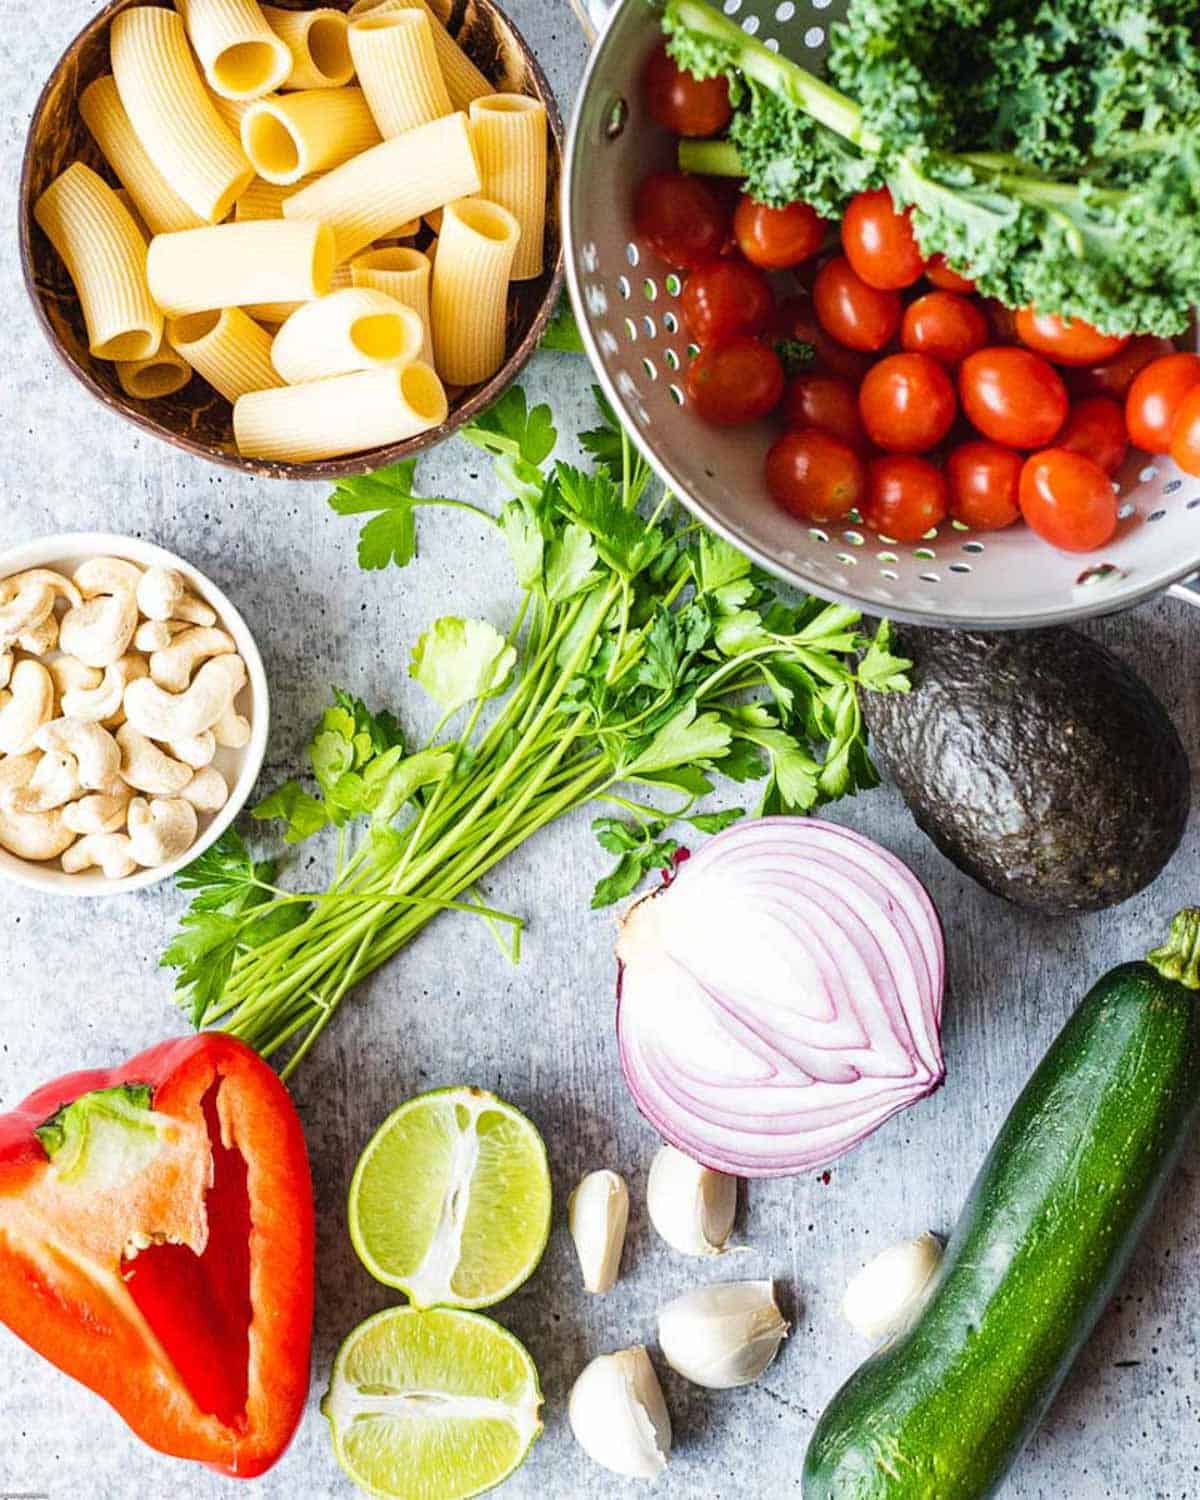 Ingredients for Roasted Vegetable Pasta Salad with Creamy Cilantro Dressing. Pasta, grape tomatoes, red bell pepper, zucchini, red onion, cashews, garlic, lime, and cilantro.